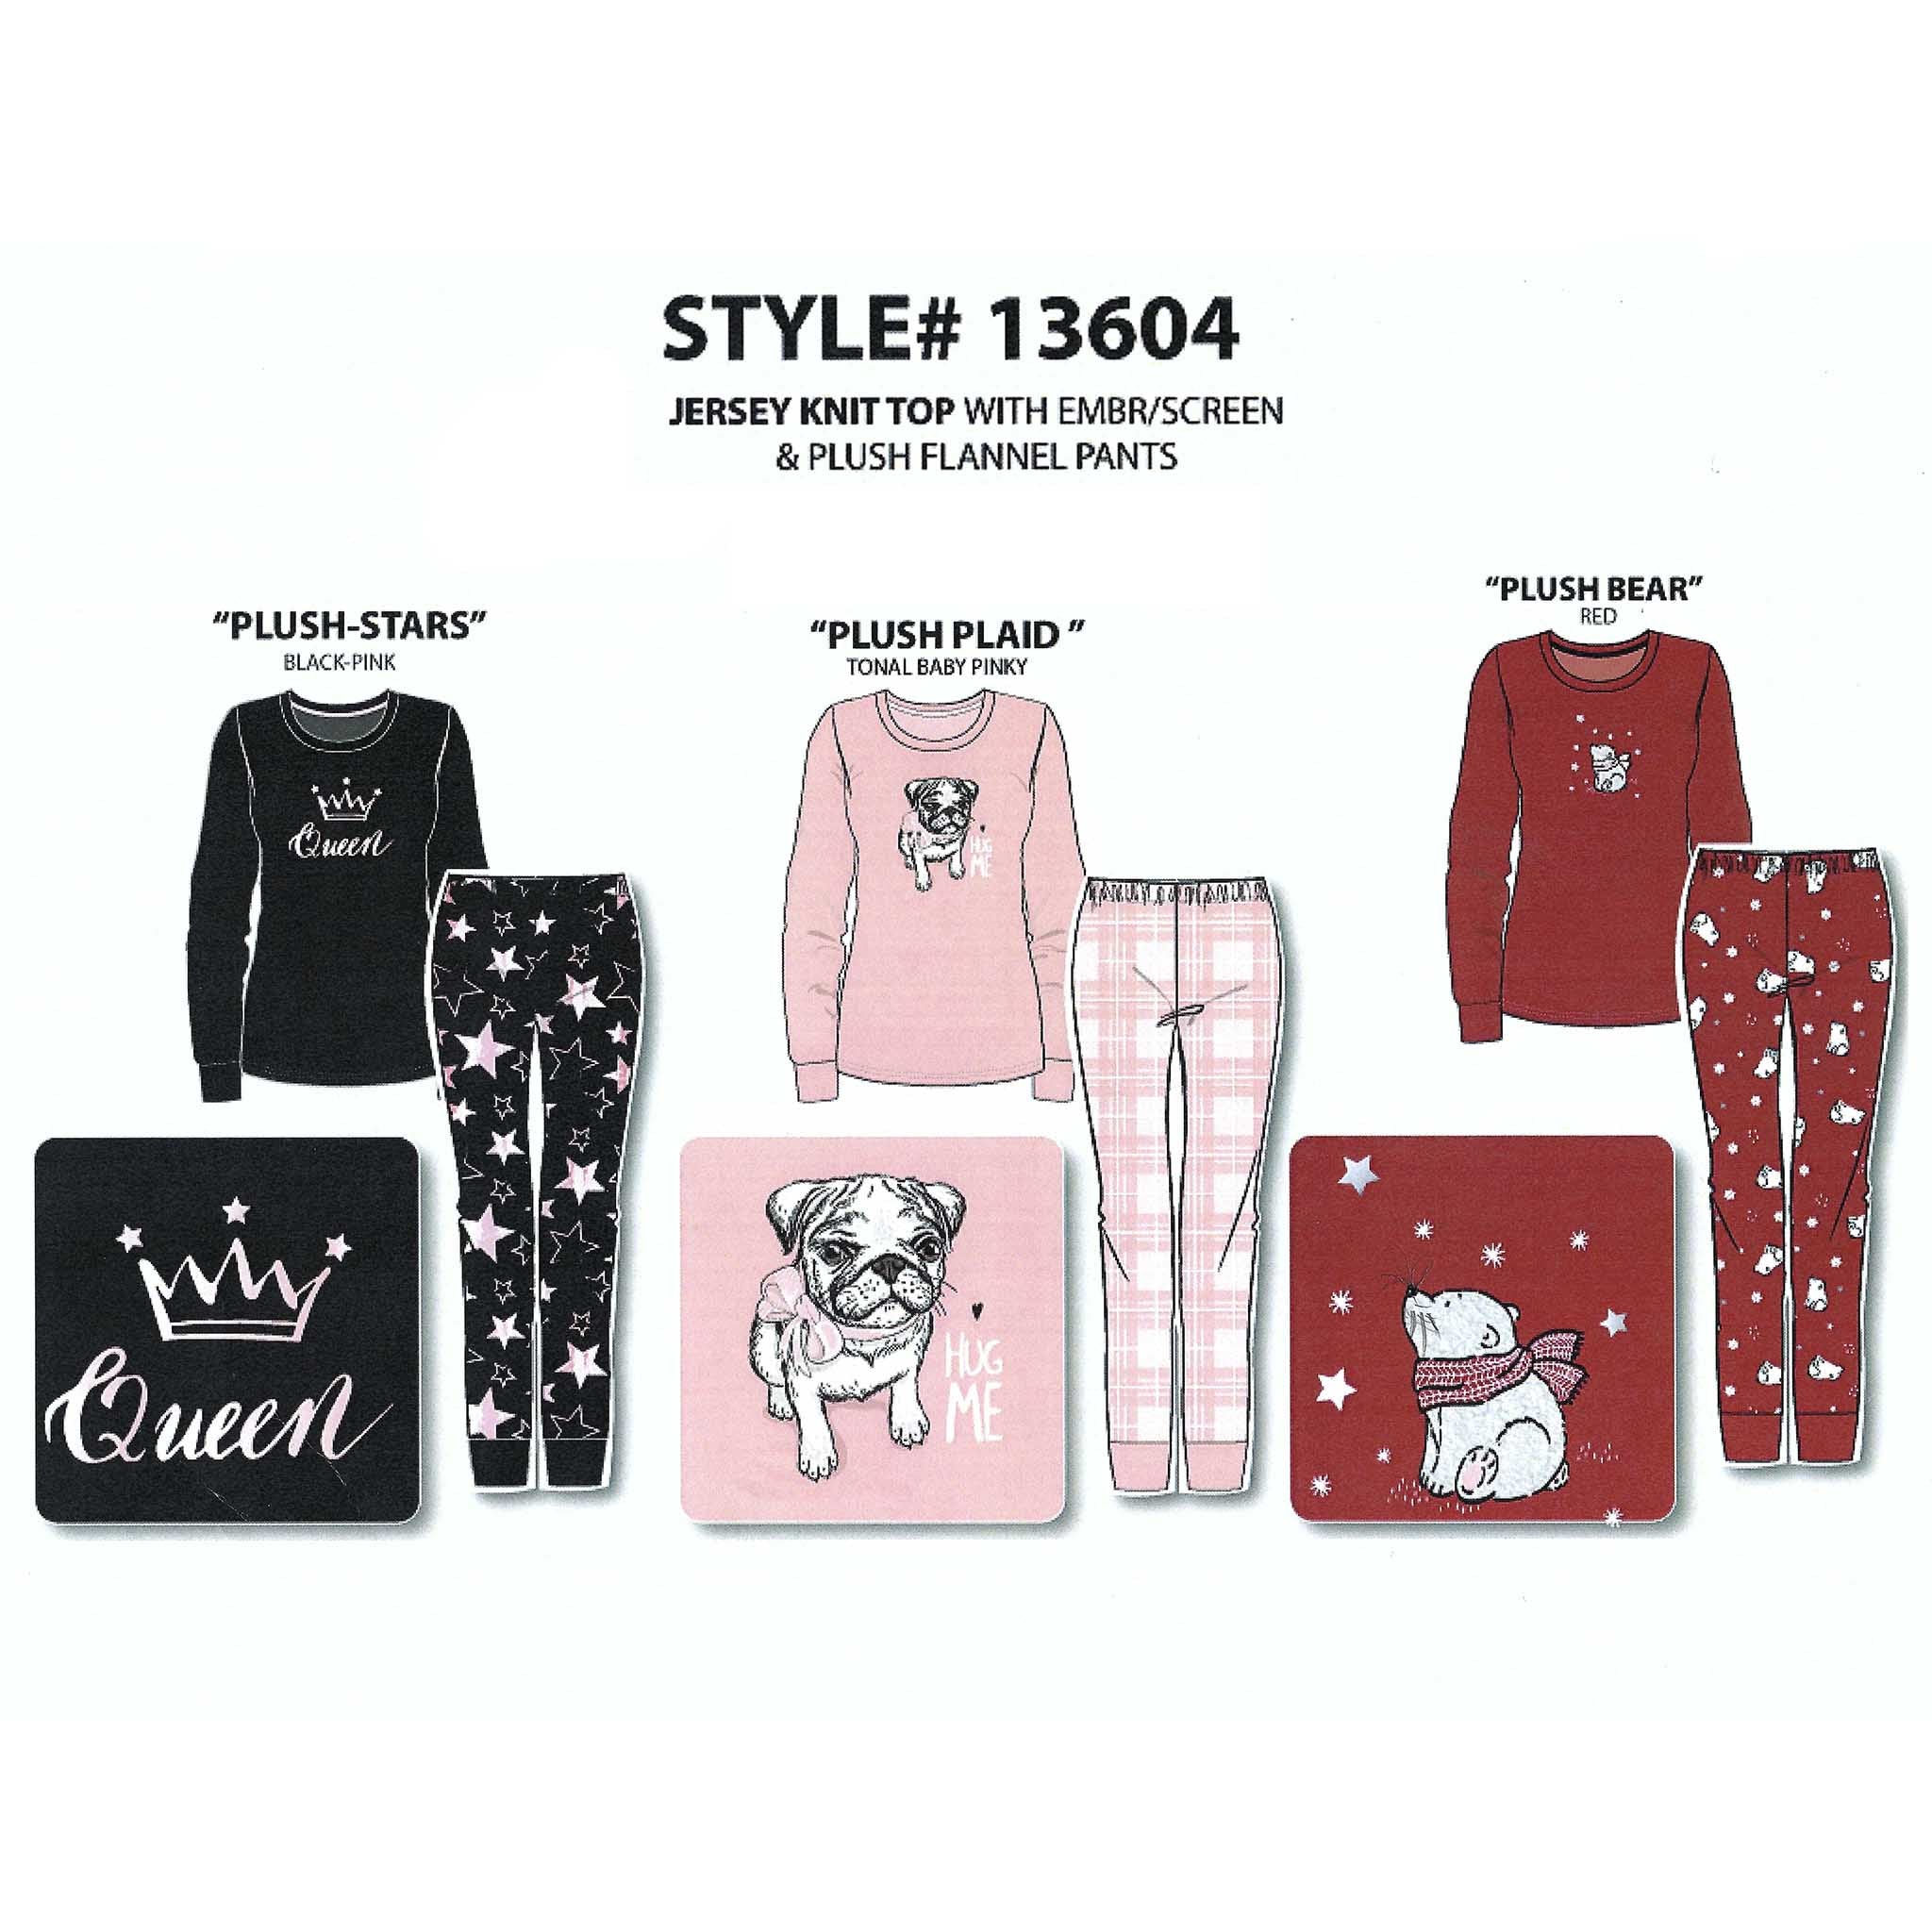 BULK BUY - Women's Two Piece Pajama Set with Solid Jersey Knit Top & Printed Plush Flannel Pants (6-Pack)